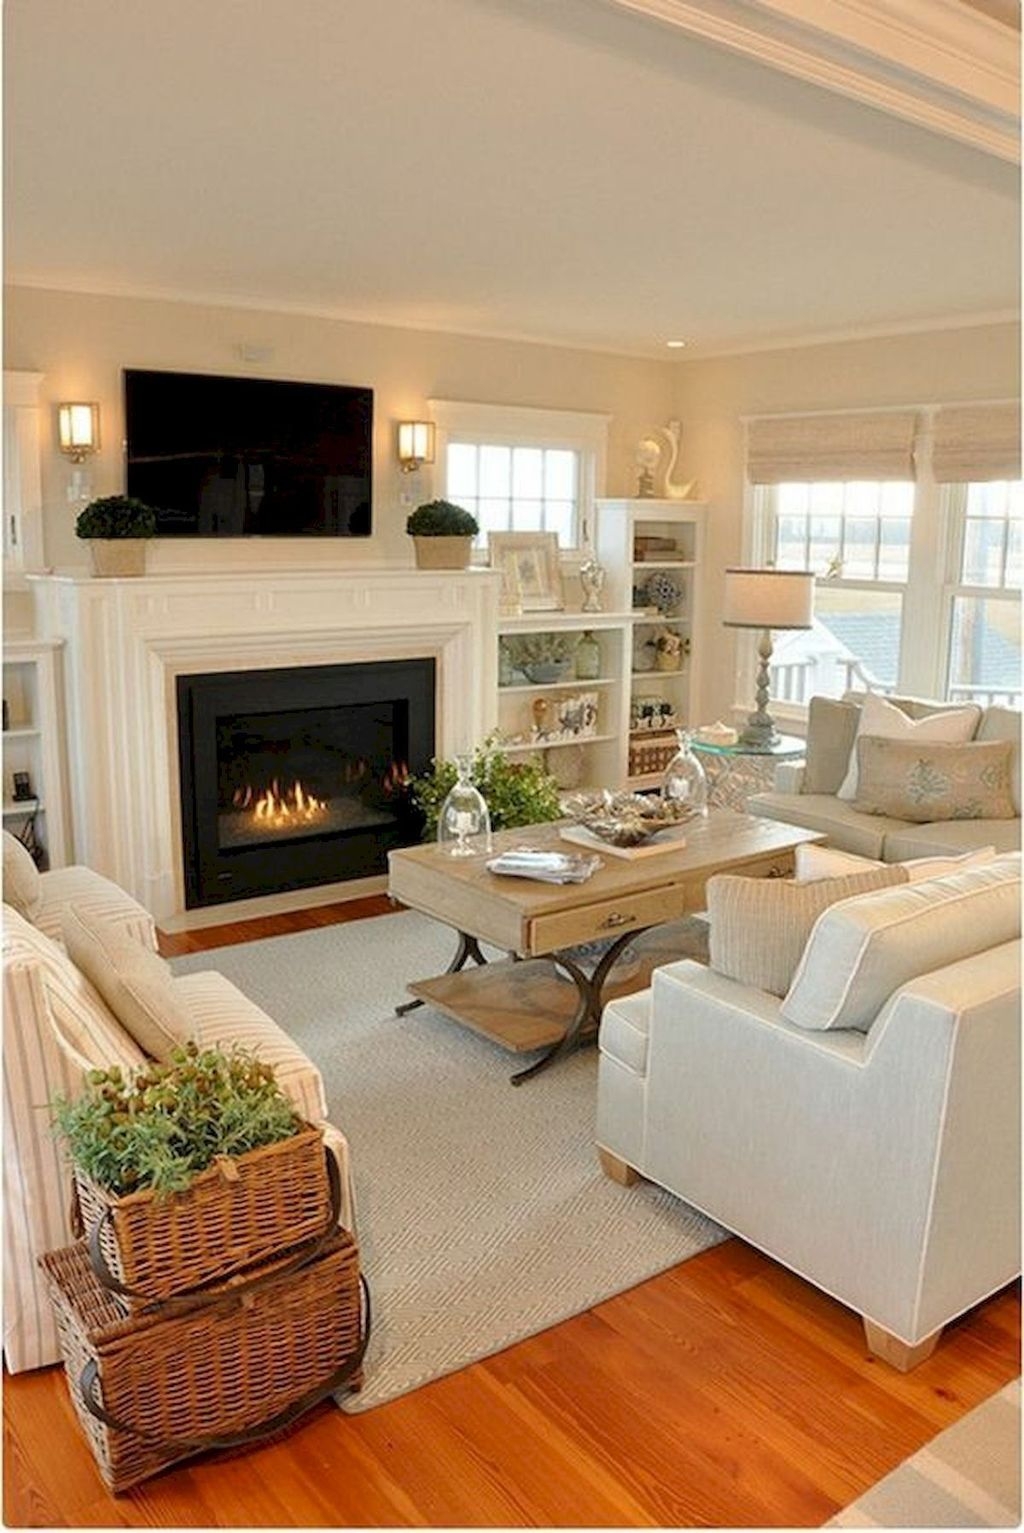 Elegant Living Room Decor: An Inviting Abode Of Comfort And Style